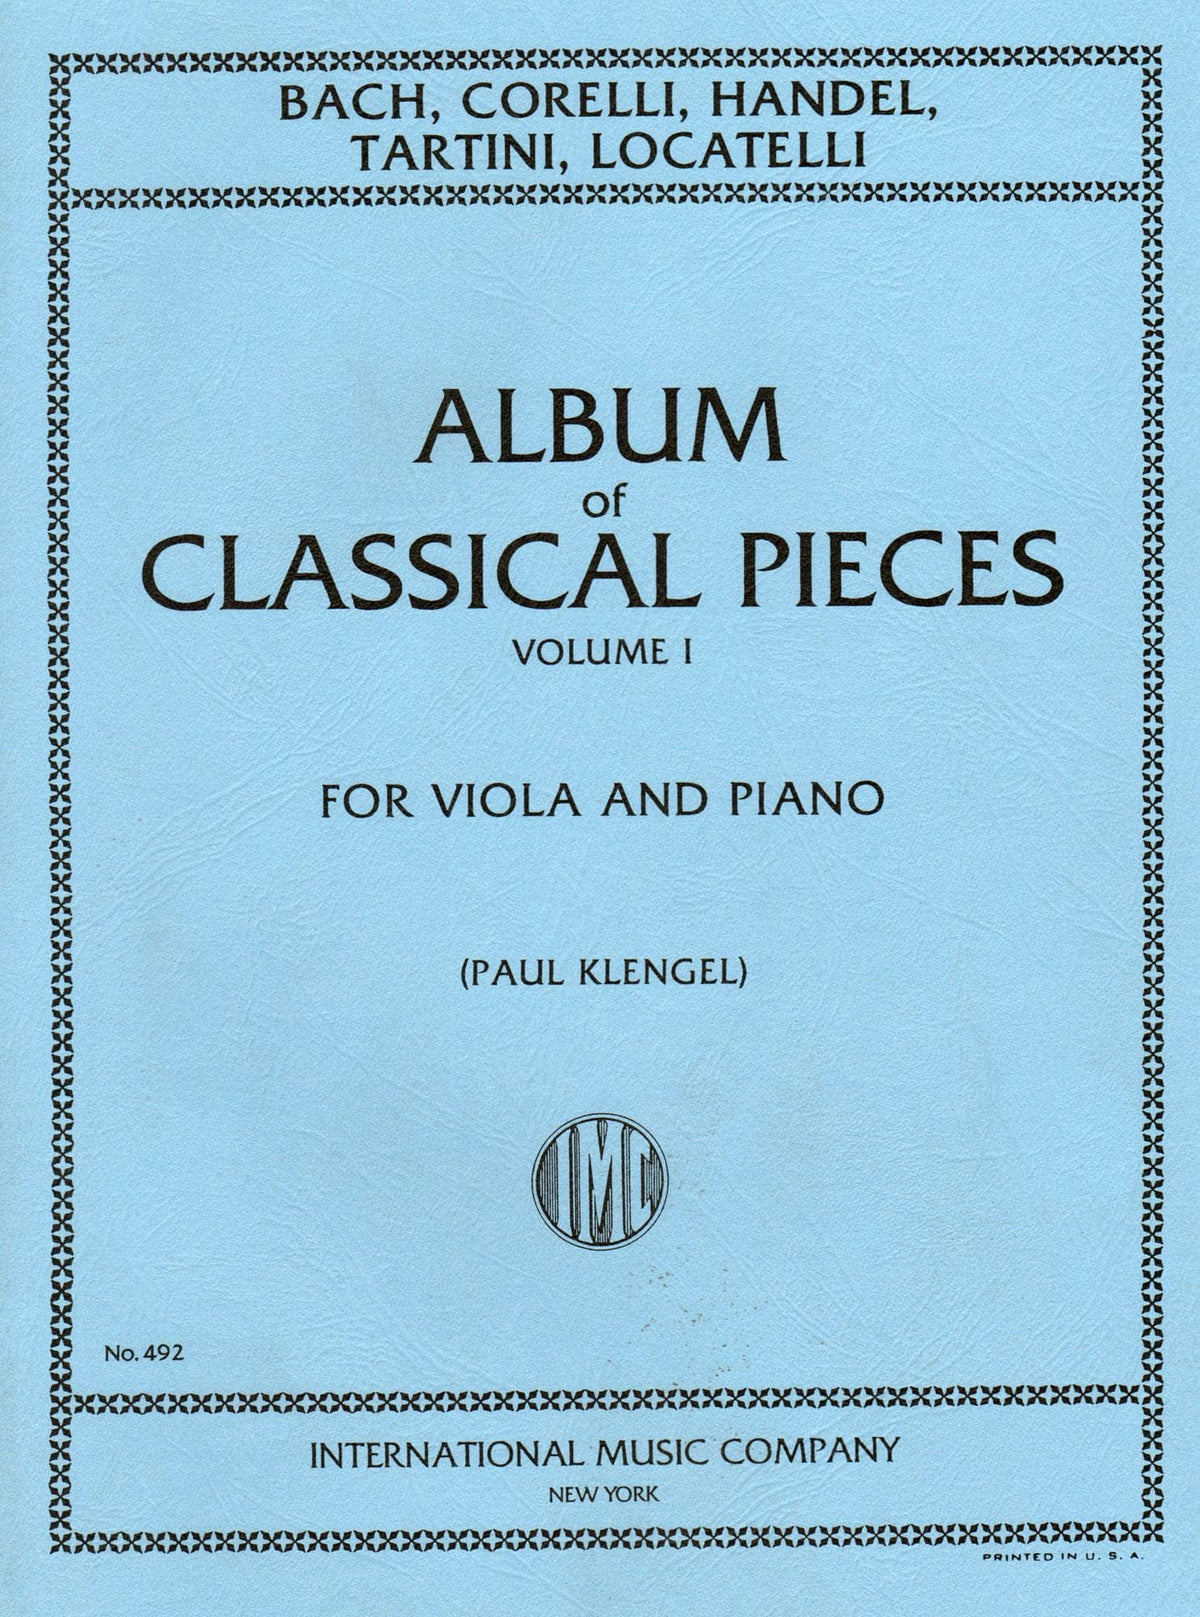 Album of Classical Pieces, Volume 1 - Viola and Piano - edited by Paul Klengel - International Music Co